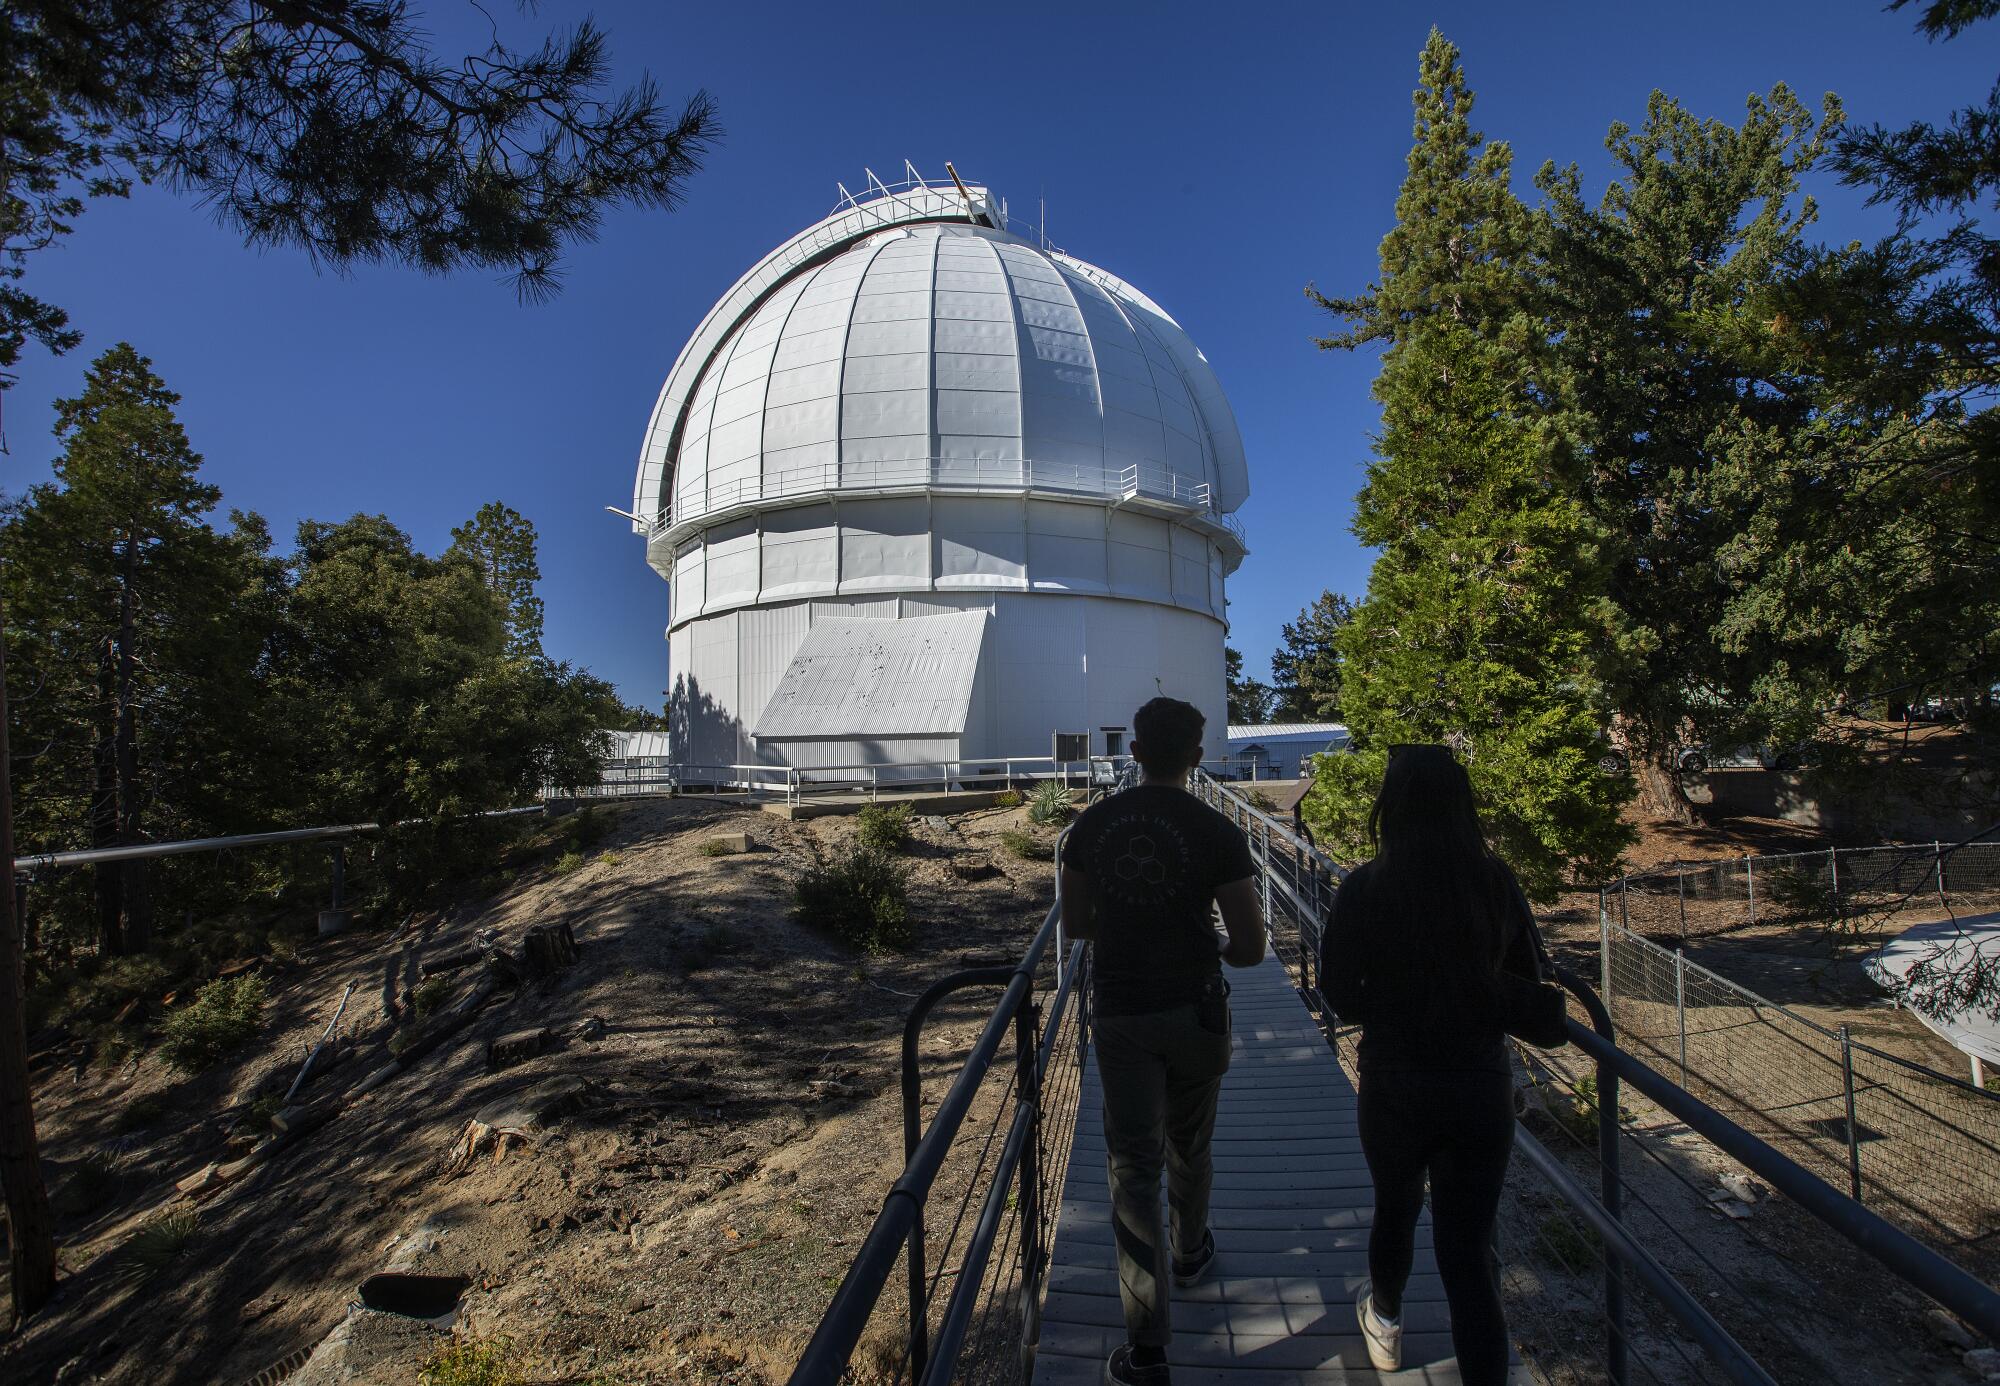 Mt. Wilson Observatory is situated in Angeles National Forest above Los Angeles.